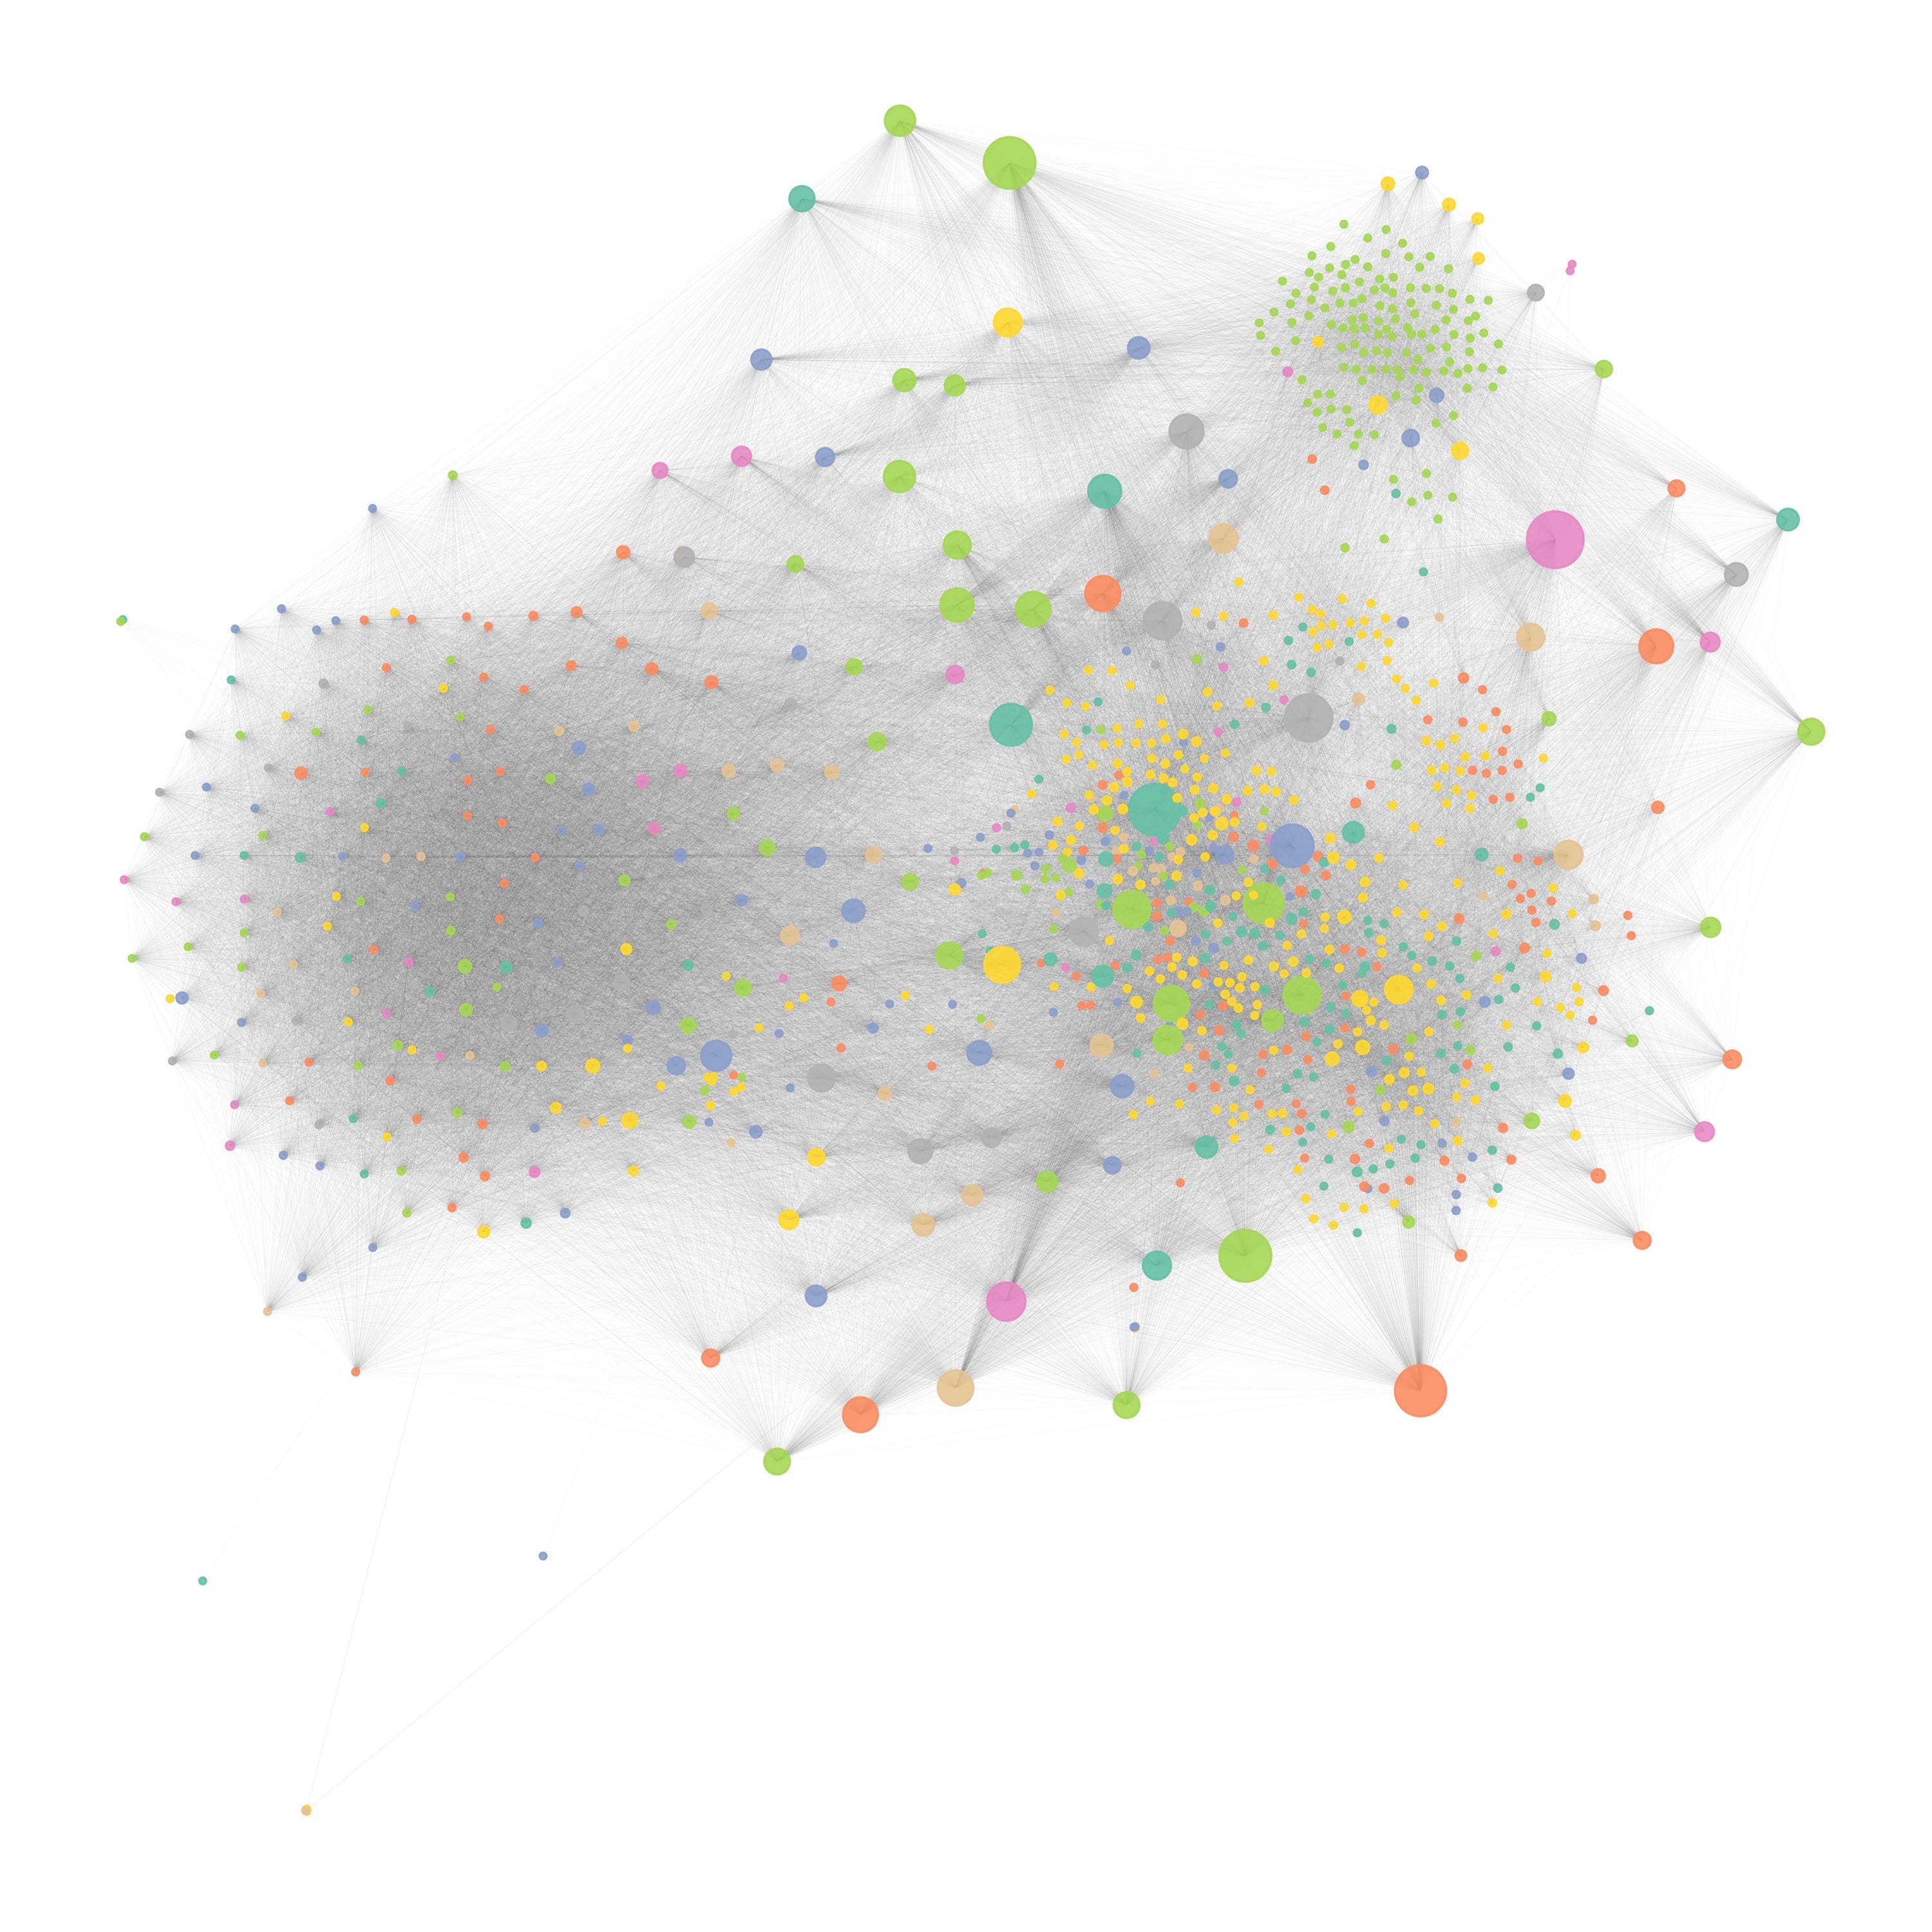 Illustration of viruss-host network showing small and large dots linked by lines in various colors